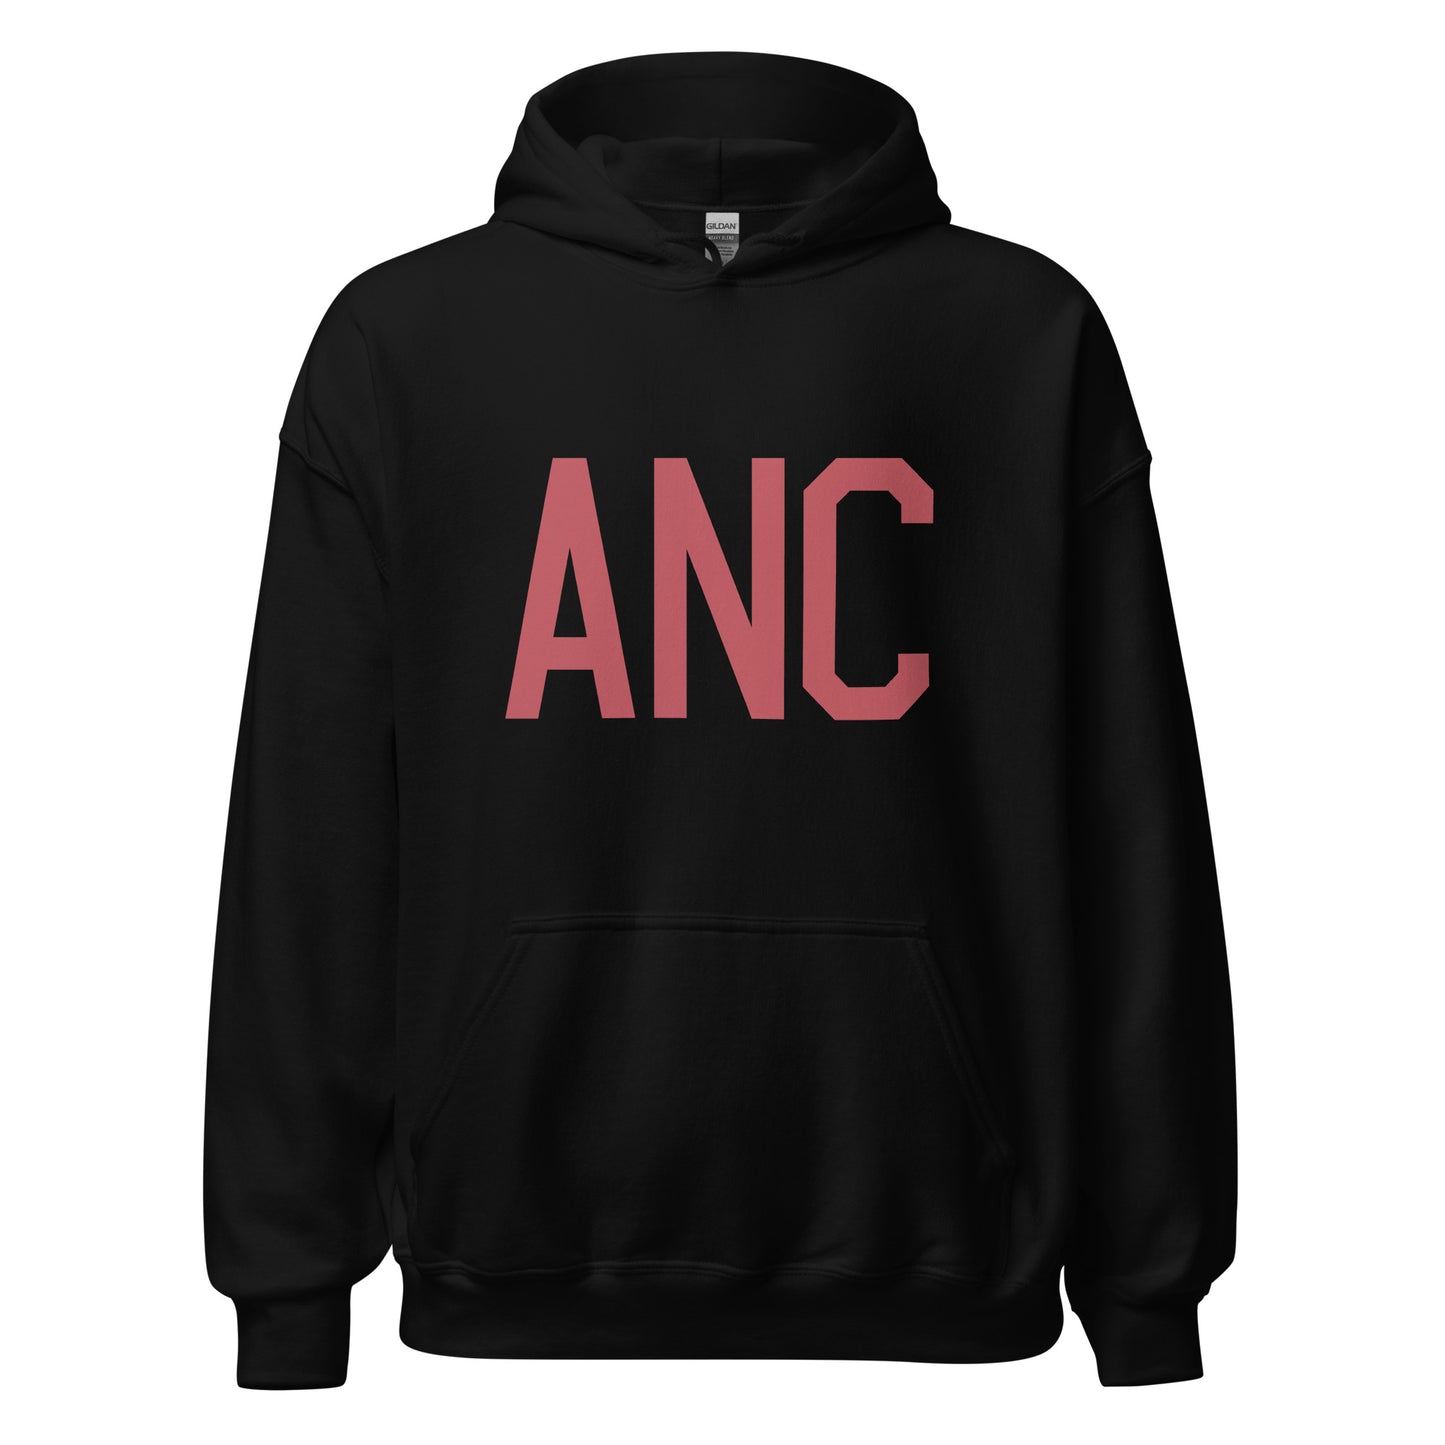 Aviation Enthusiast Hoodie - Deep Pink Graphic • ANC Anchorage • YHM Designs - Image 03